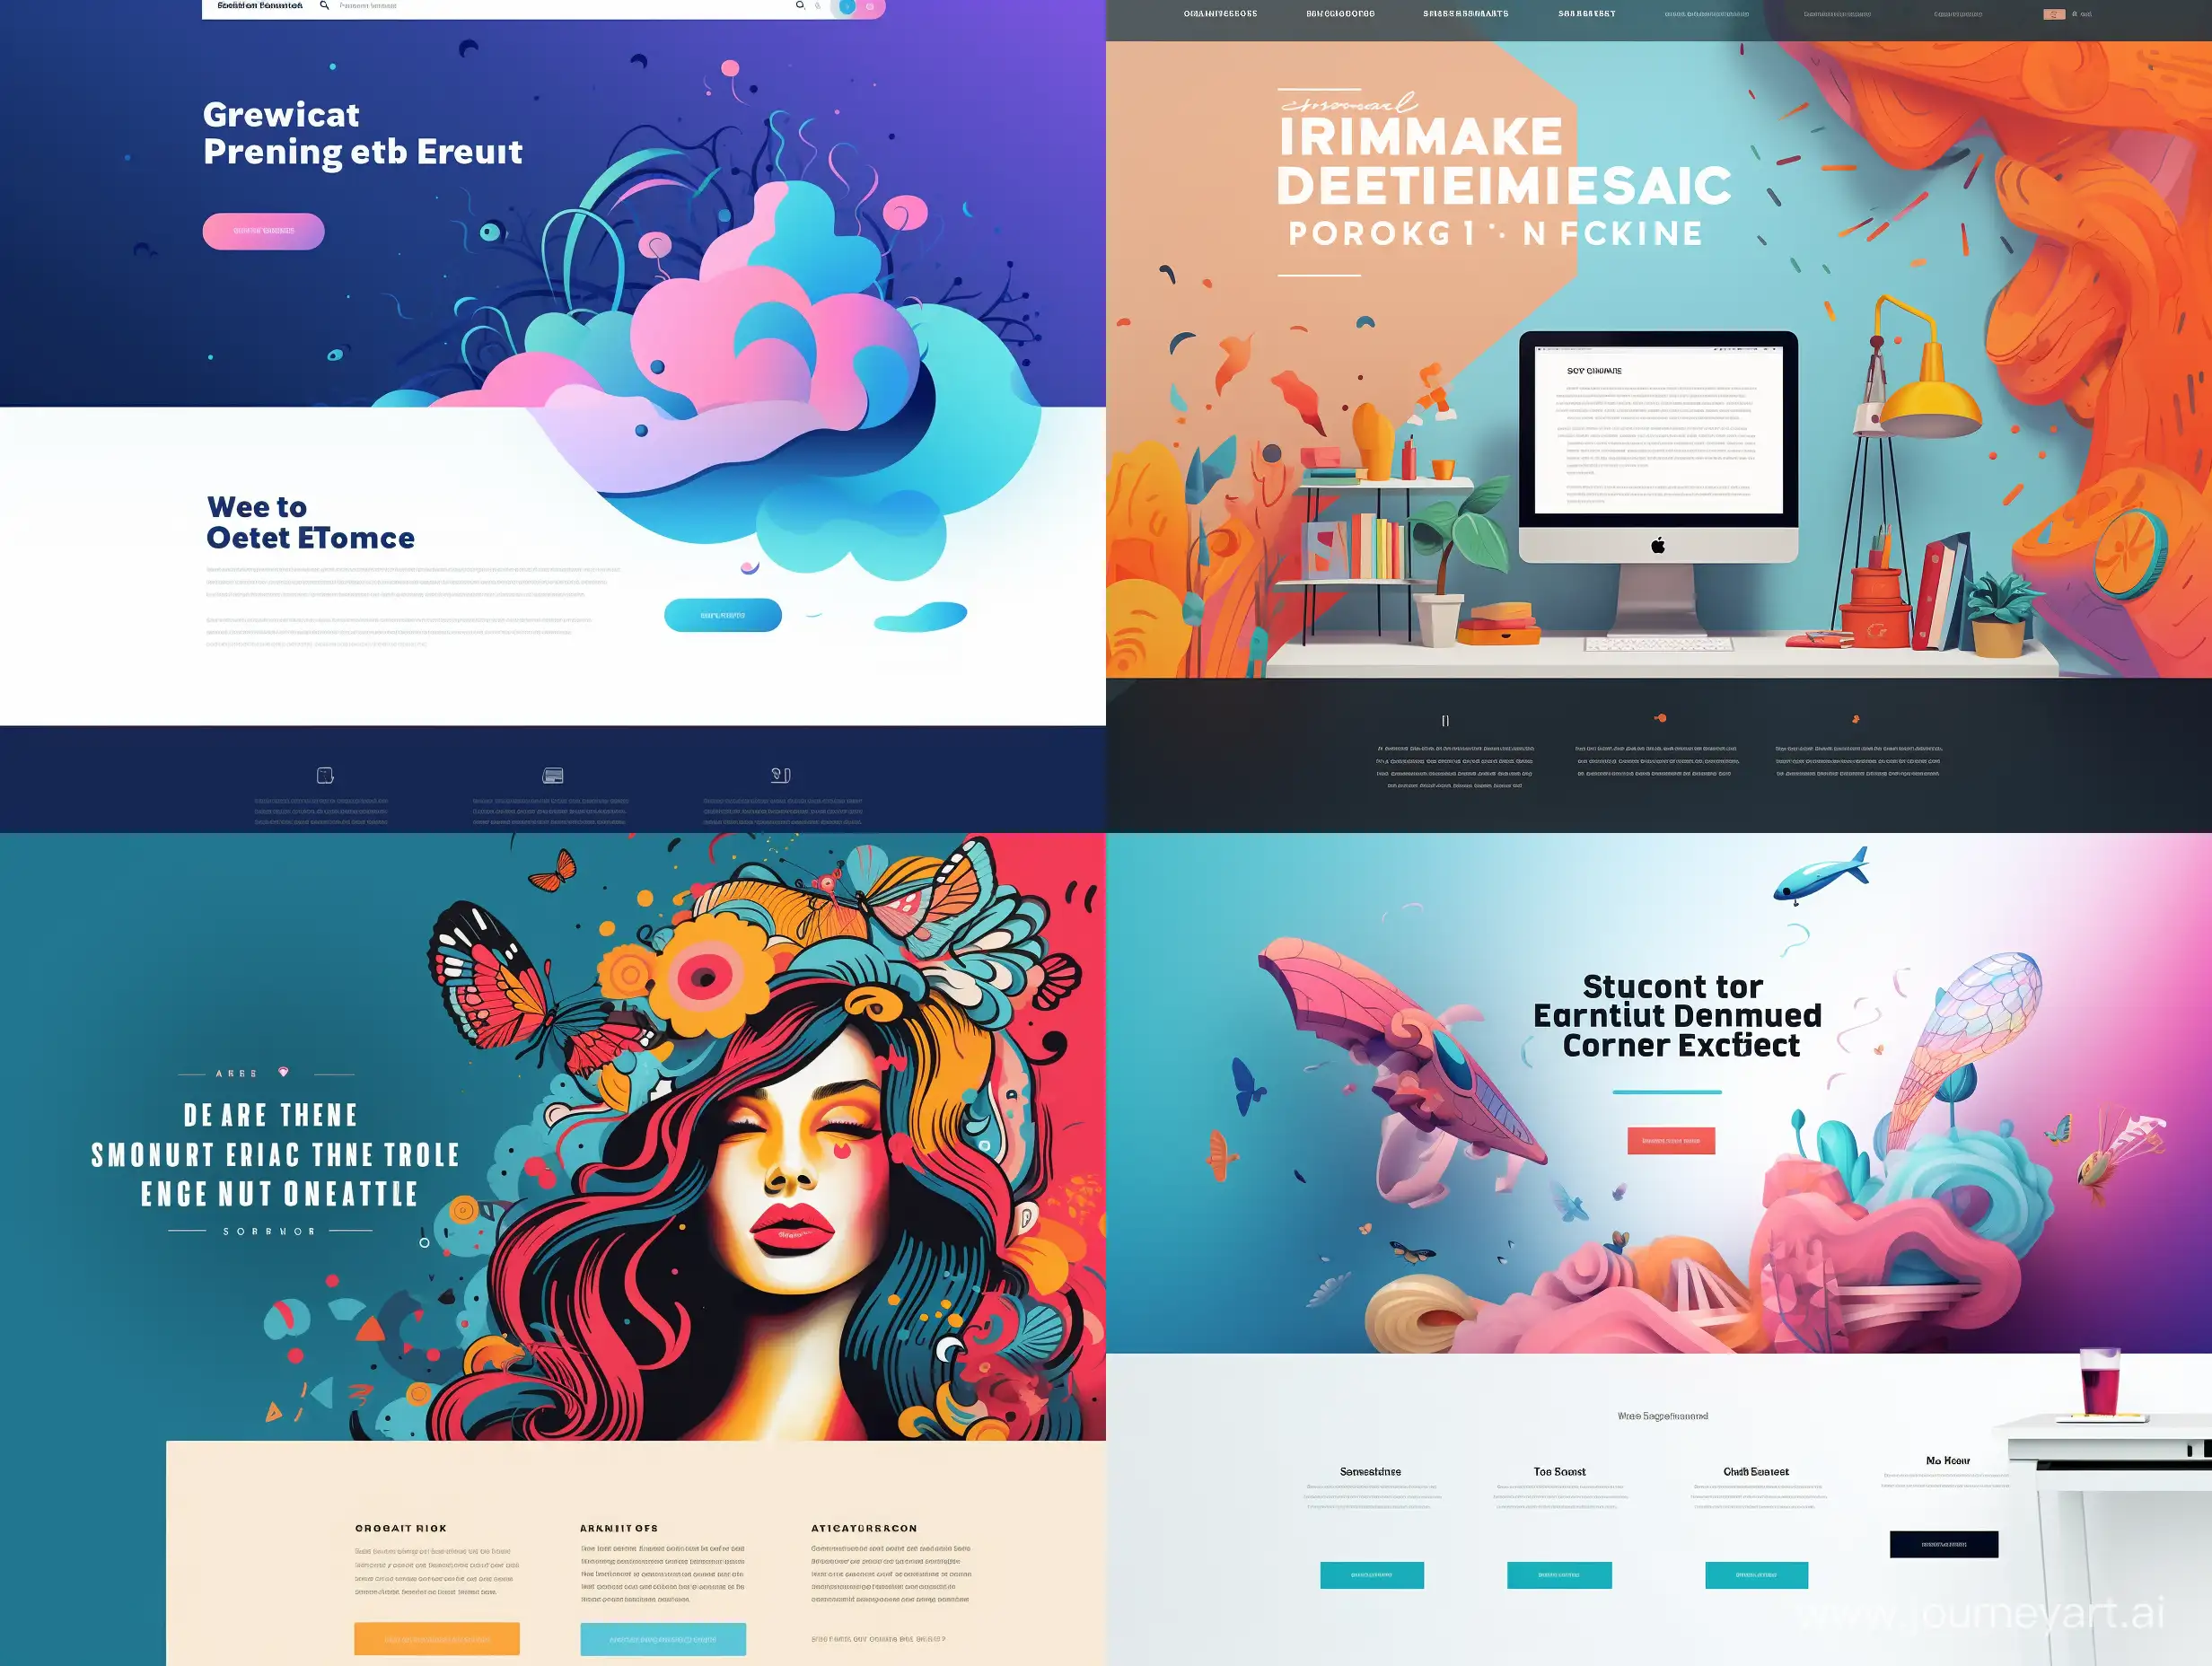 web design homepage image for illustration creator - designer company with a modern and sleek design to convey trust and confidence